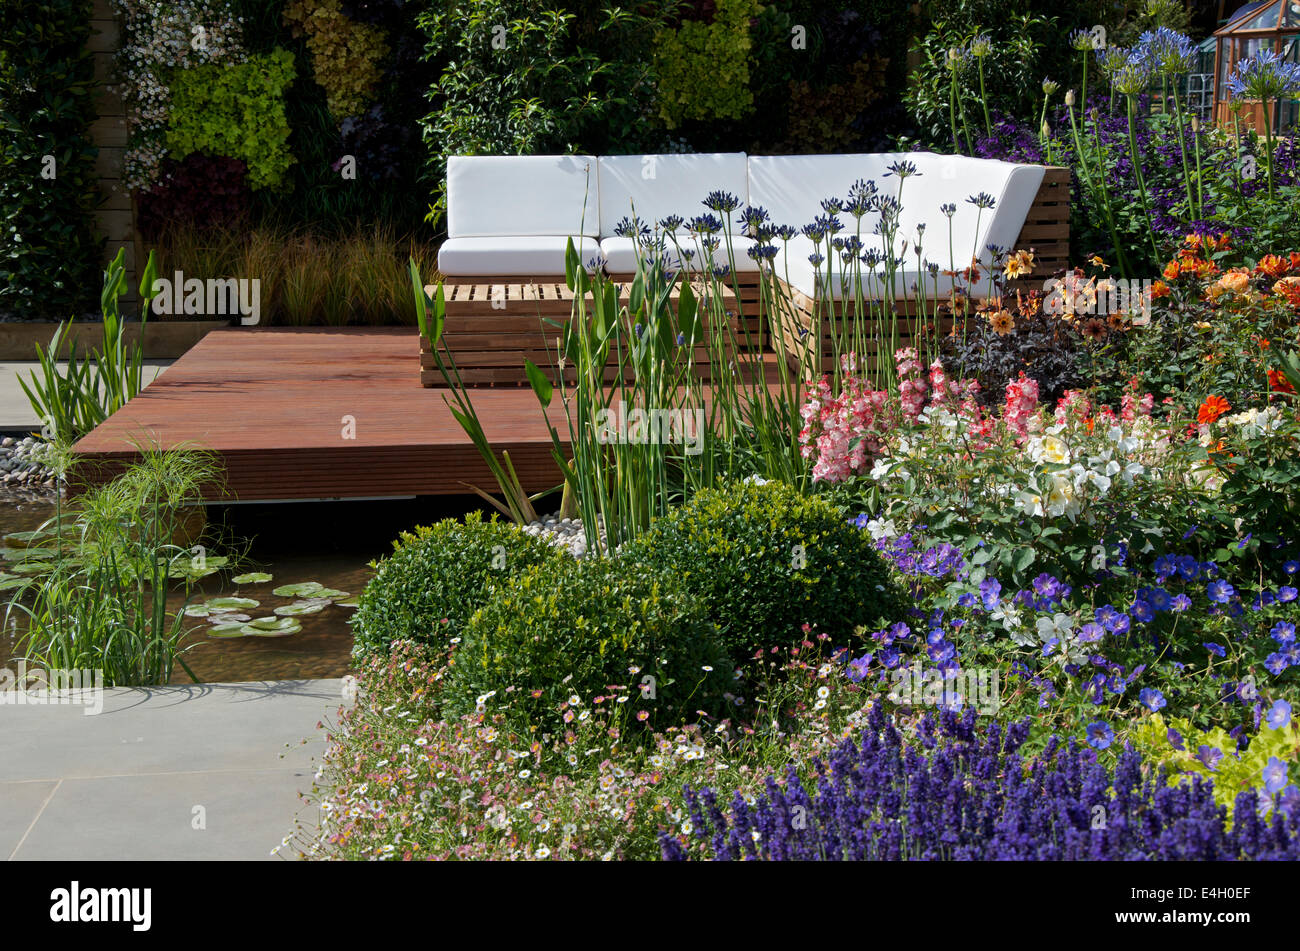 Seating area in A Hampton Garden at RHS Hampton Court Palace Flower Show 2014. Stock Photo